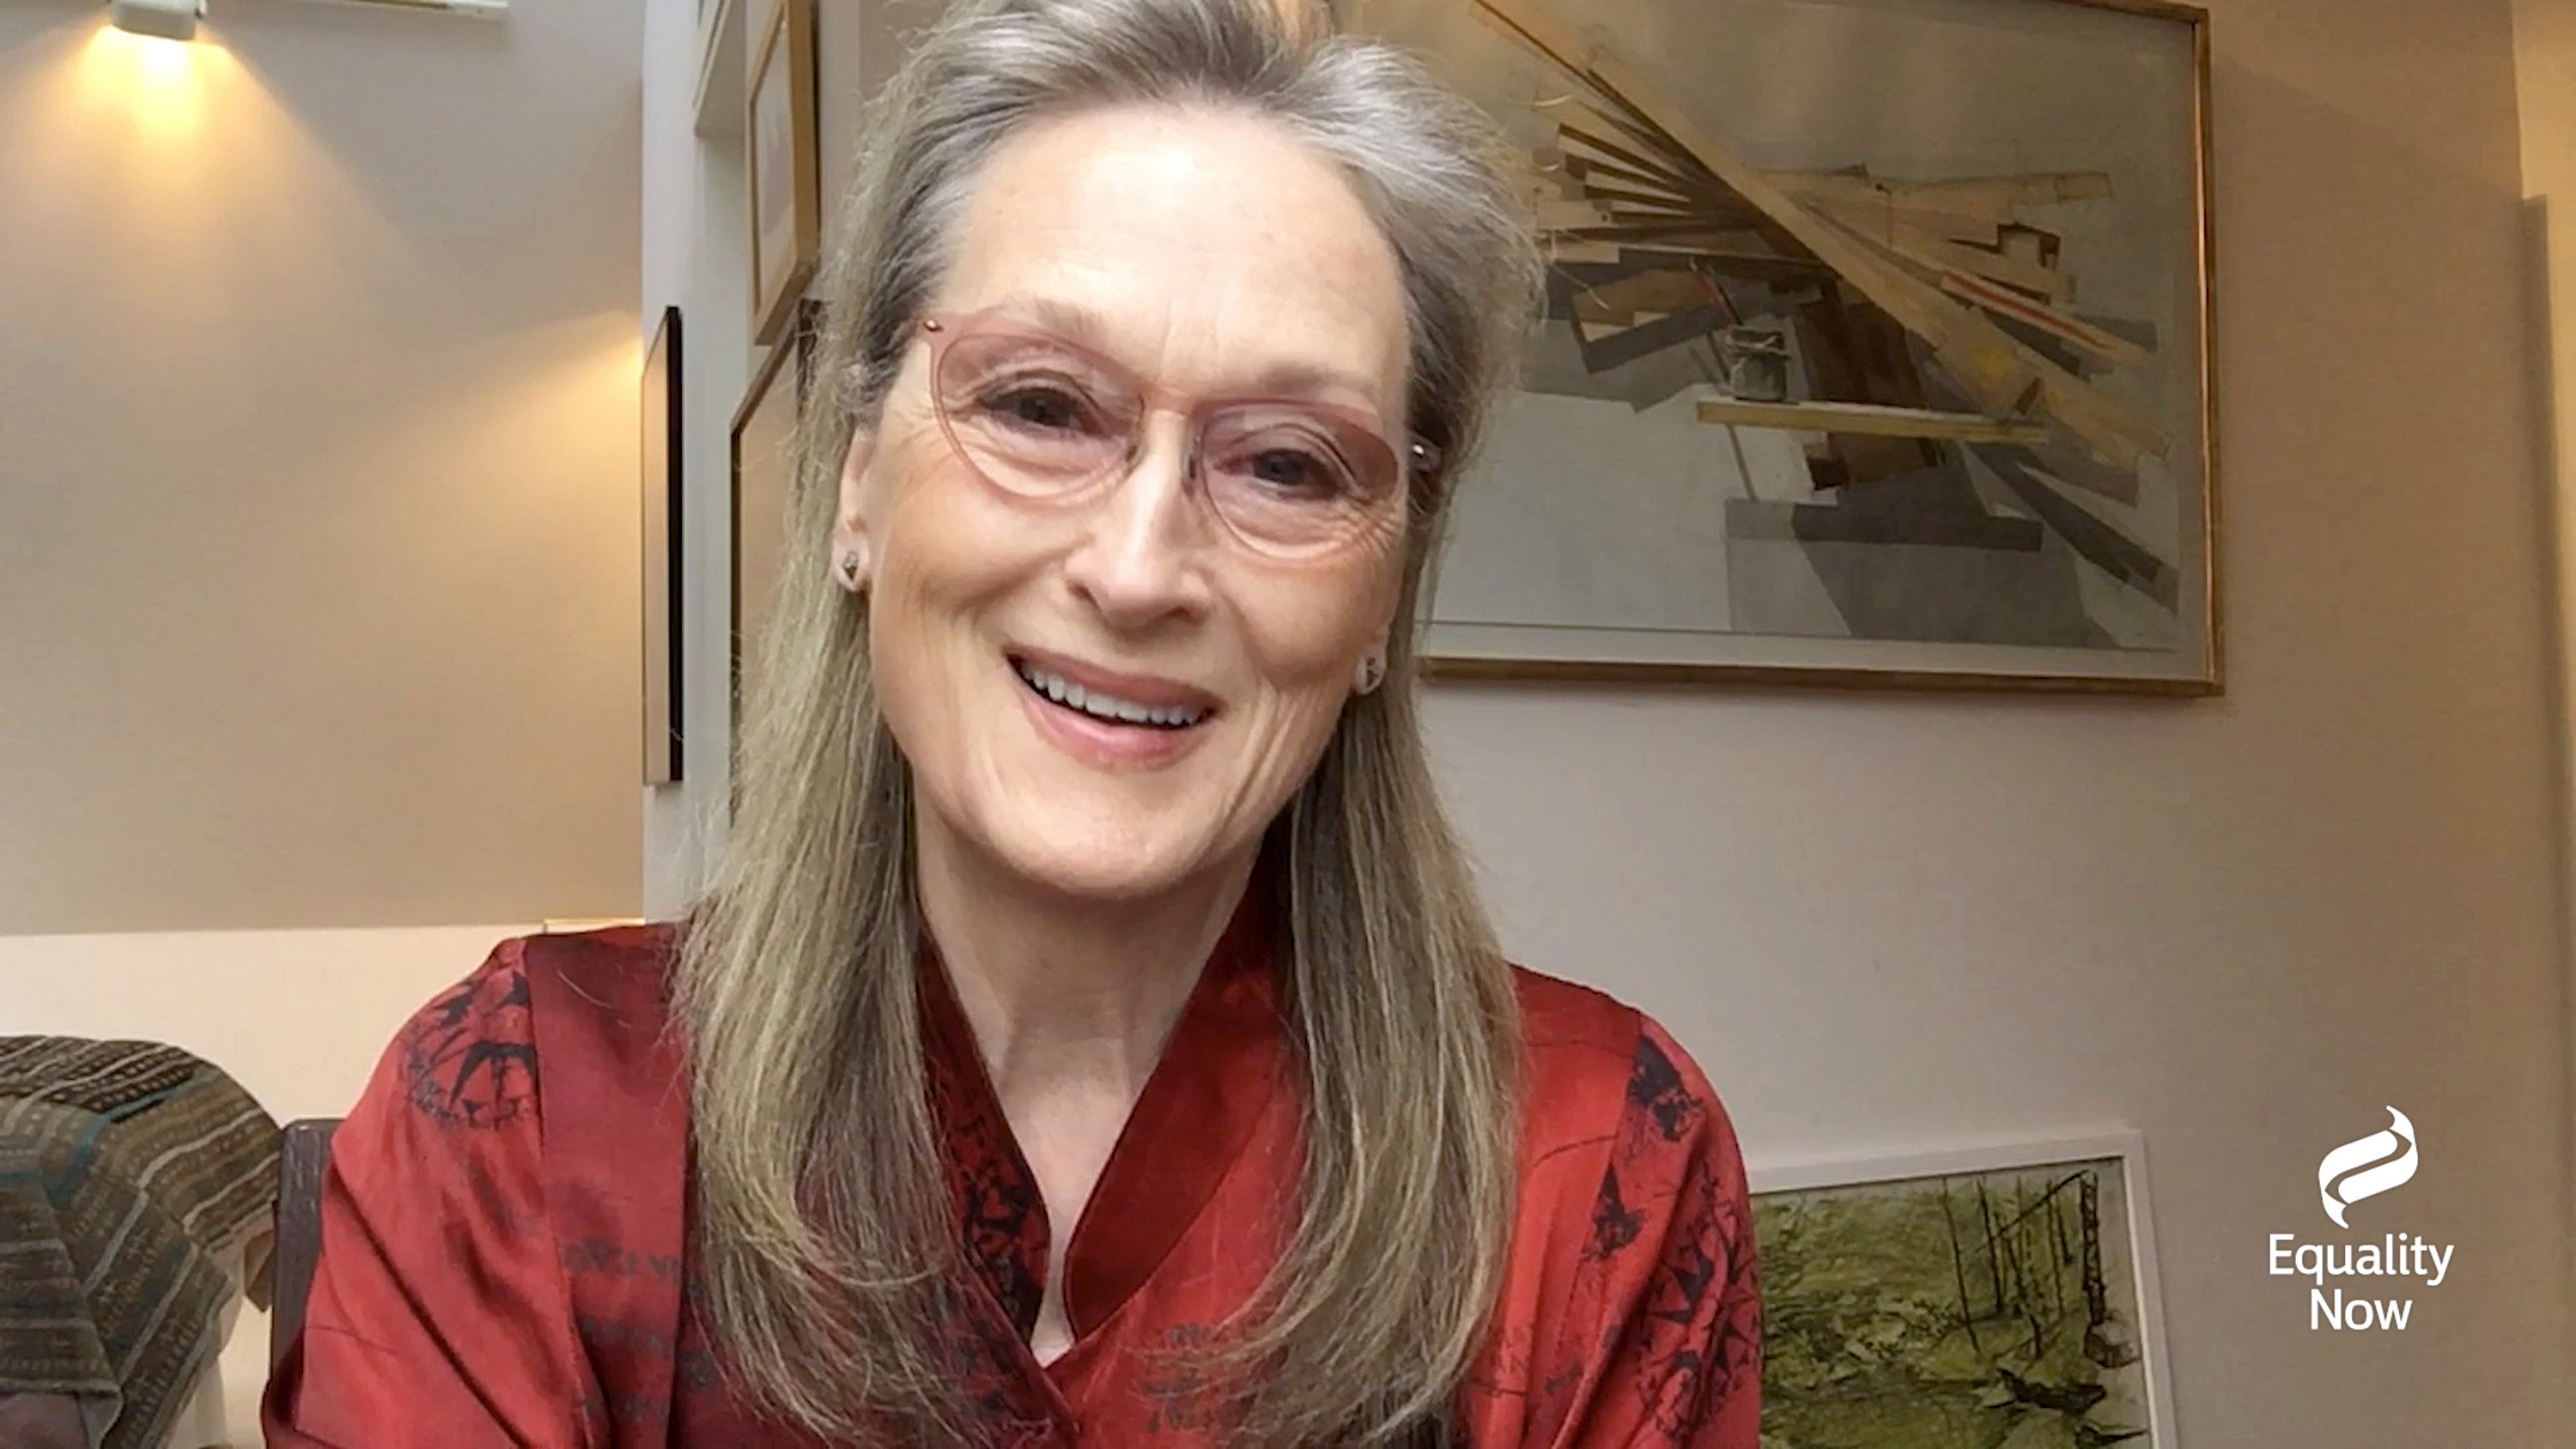 Meryl Streep speaks during Equality Now's Virtual Make Equality Reality Gala on December 03, 2020. | Source: Getty Images